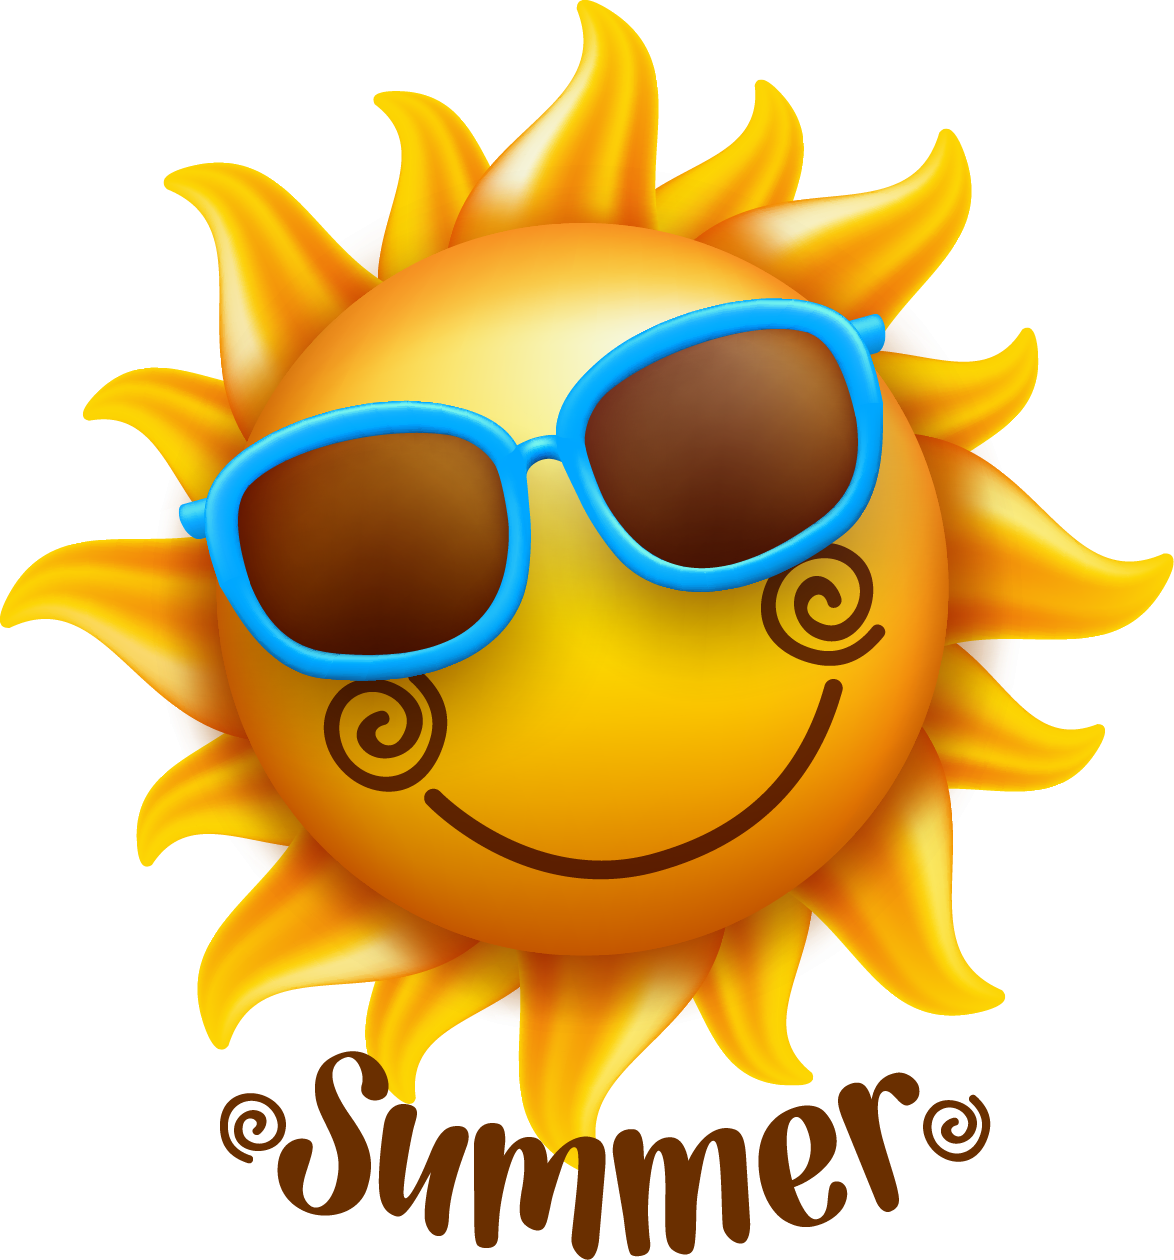 Summer Sun Smiley Illustration Face PNG Image High Quality Clipart